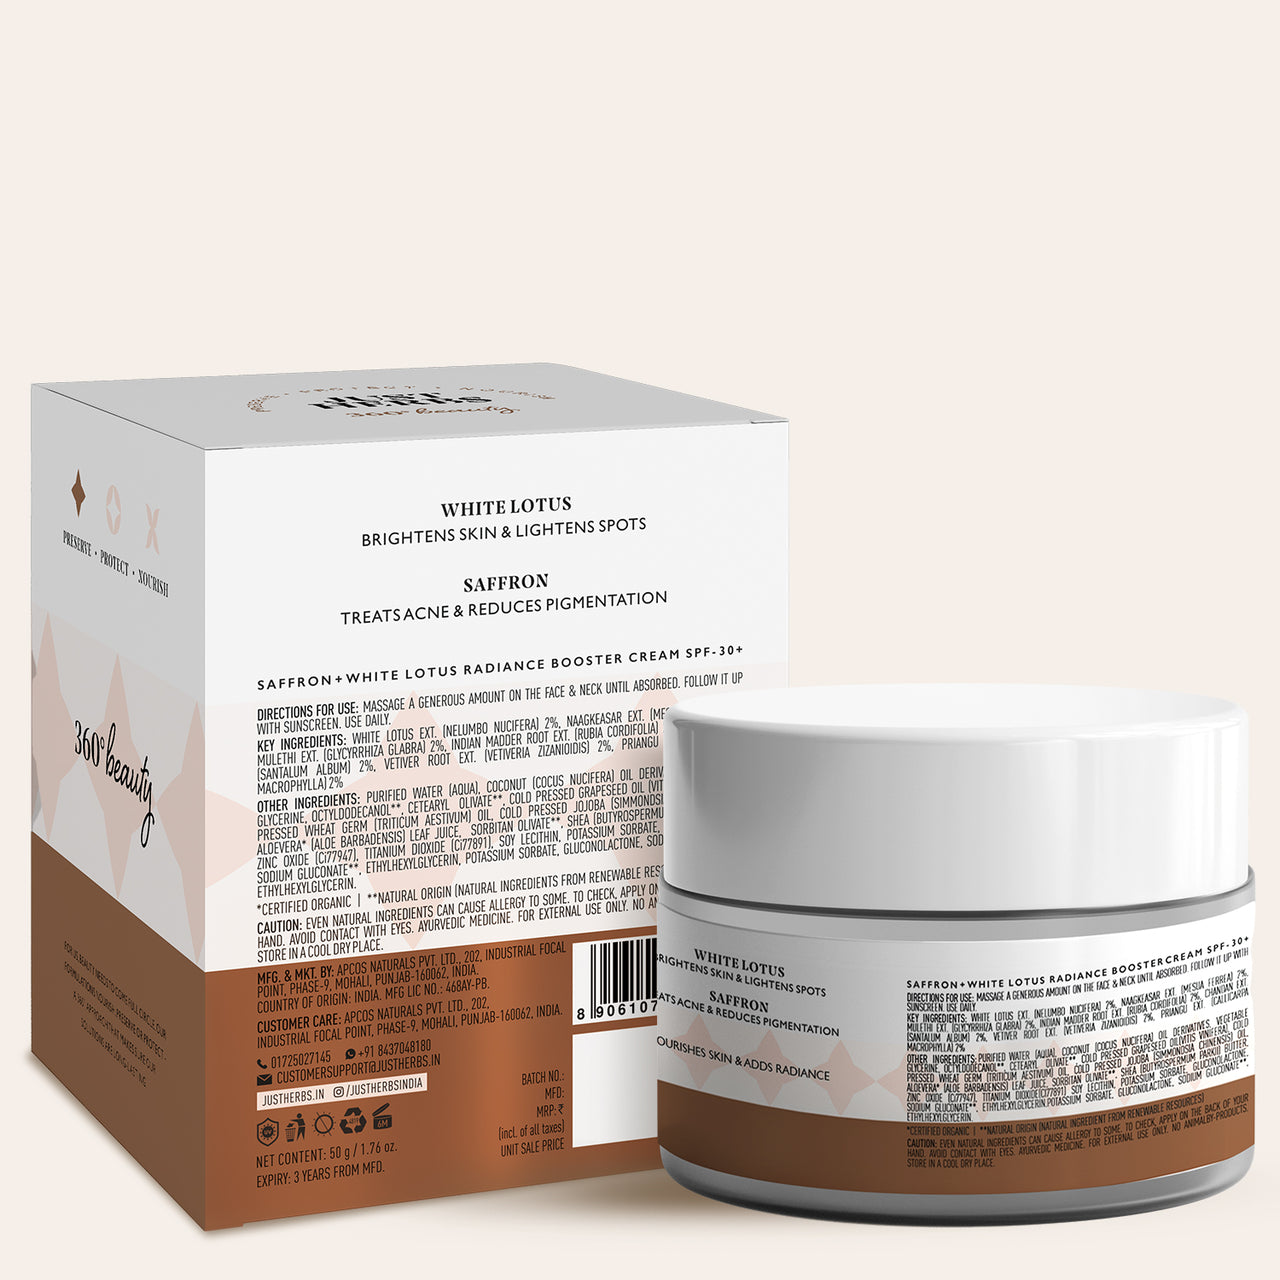 Radiance Booster Cream SPF 30+ with White Lotus and Saffron